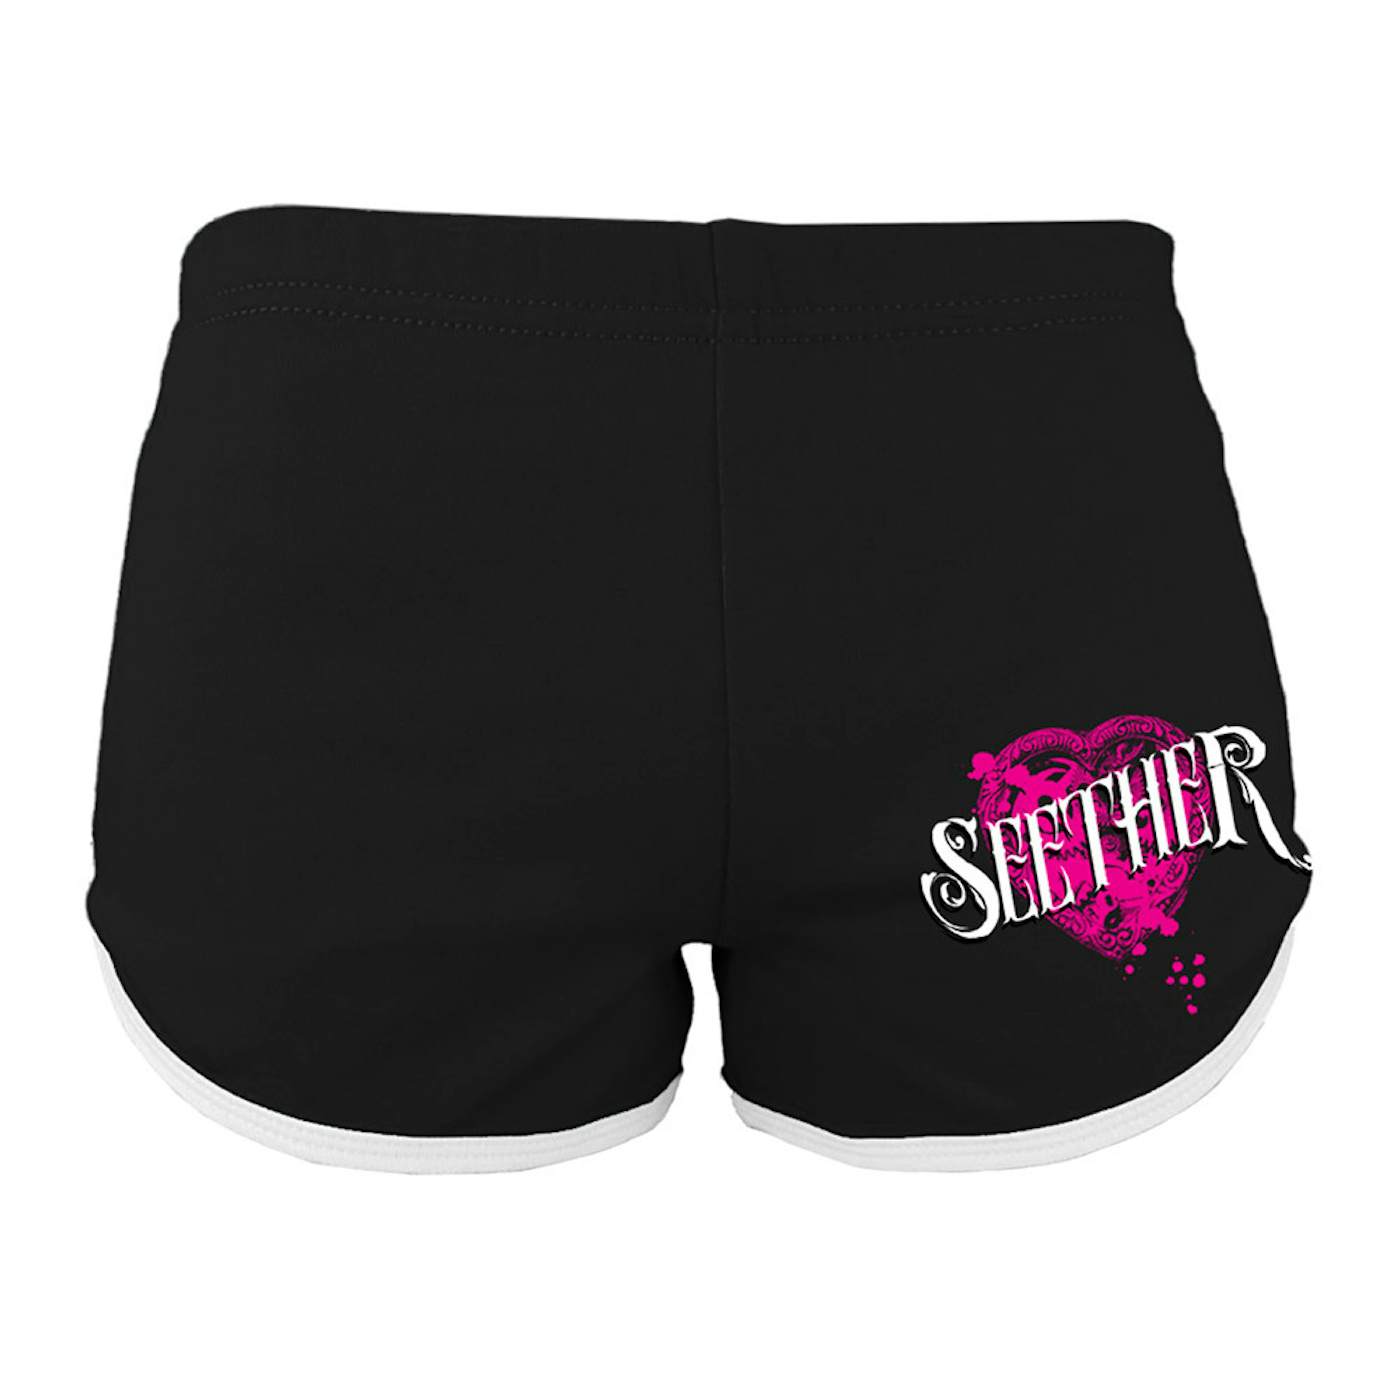 Seether Running Shorts